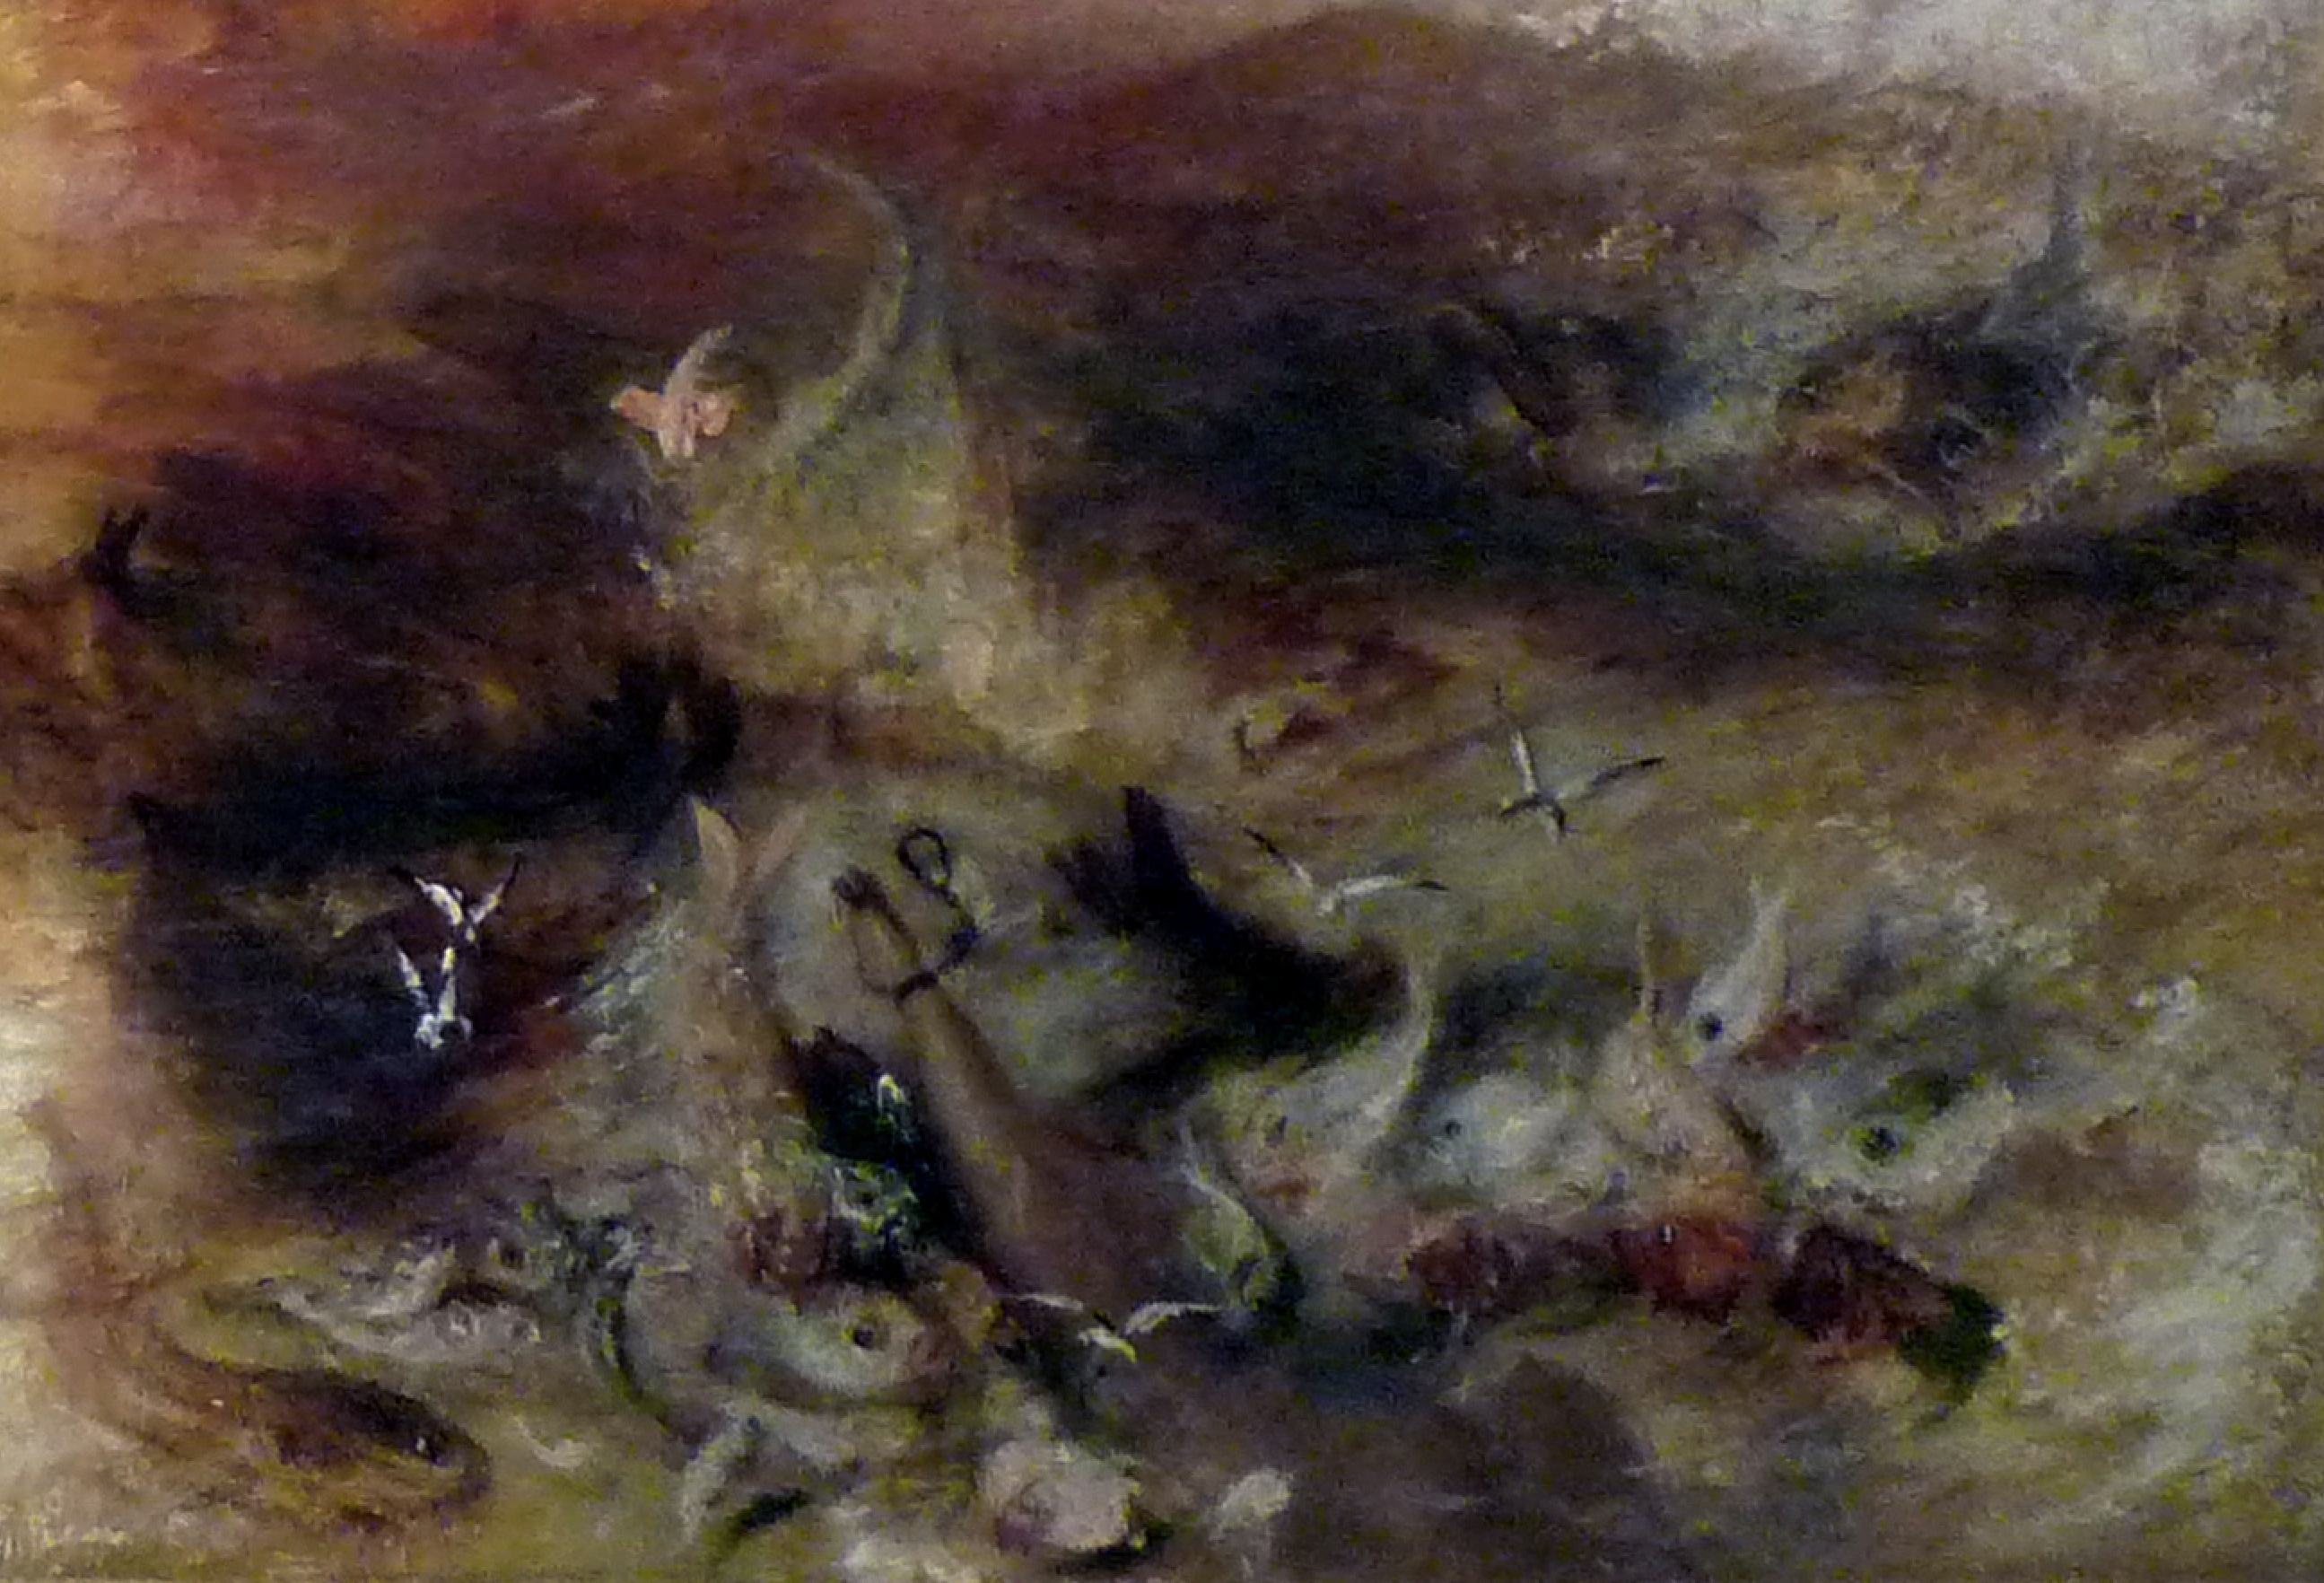 Detail, Joseph Mallord William Turner, Slavers Throwing Overboard the Dead and Dying, Typhoon Coming on (Slave Ship), oil on canvas, 1840